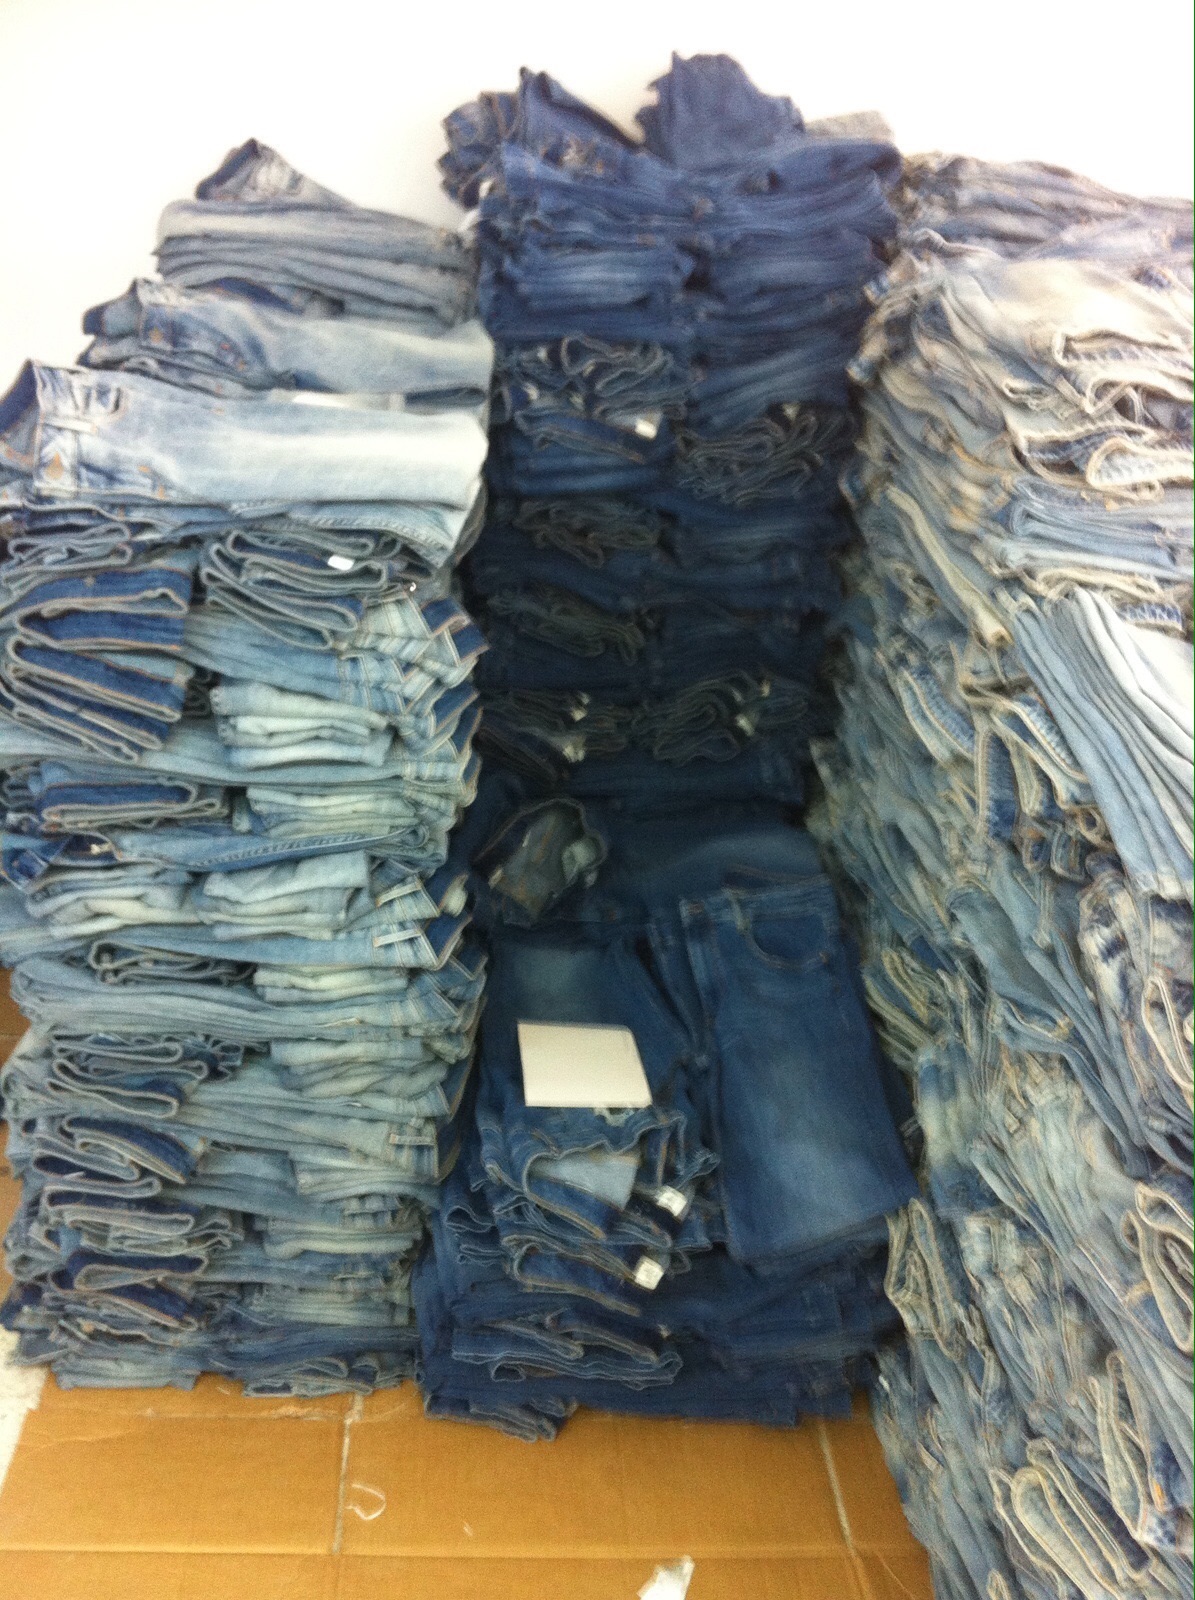 Louis Vuitton Jeans - Stocklots and Traders